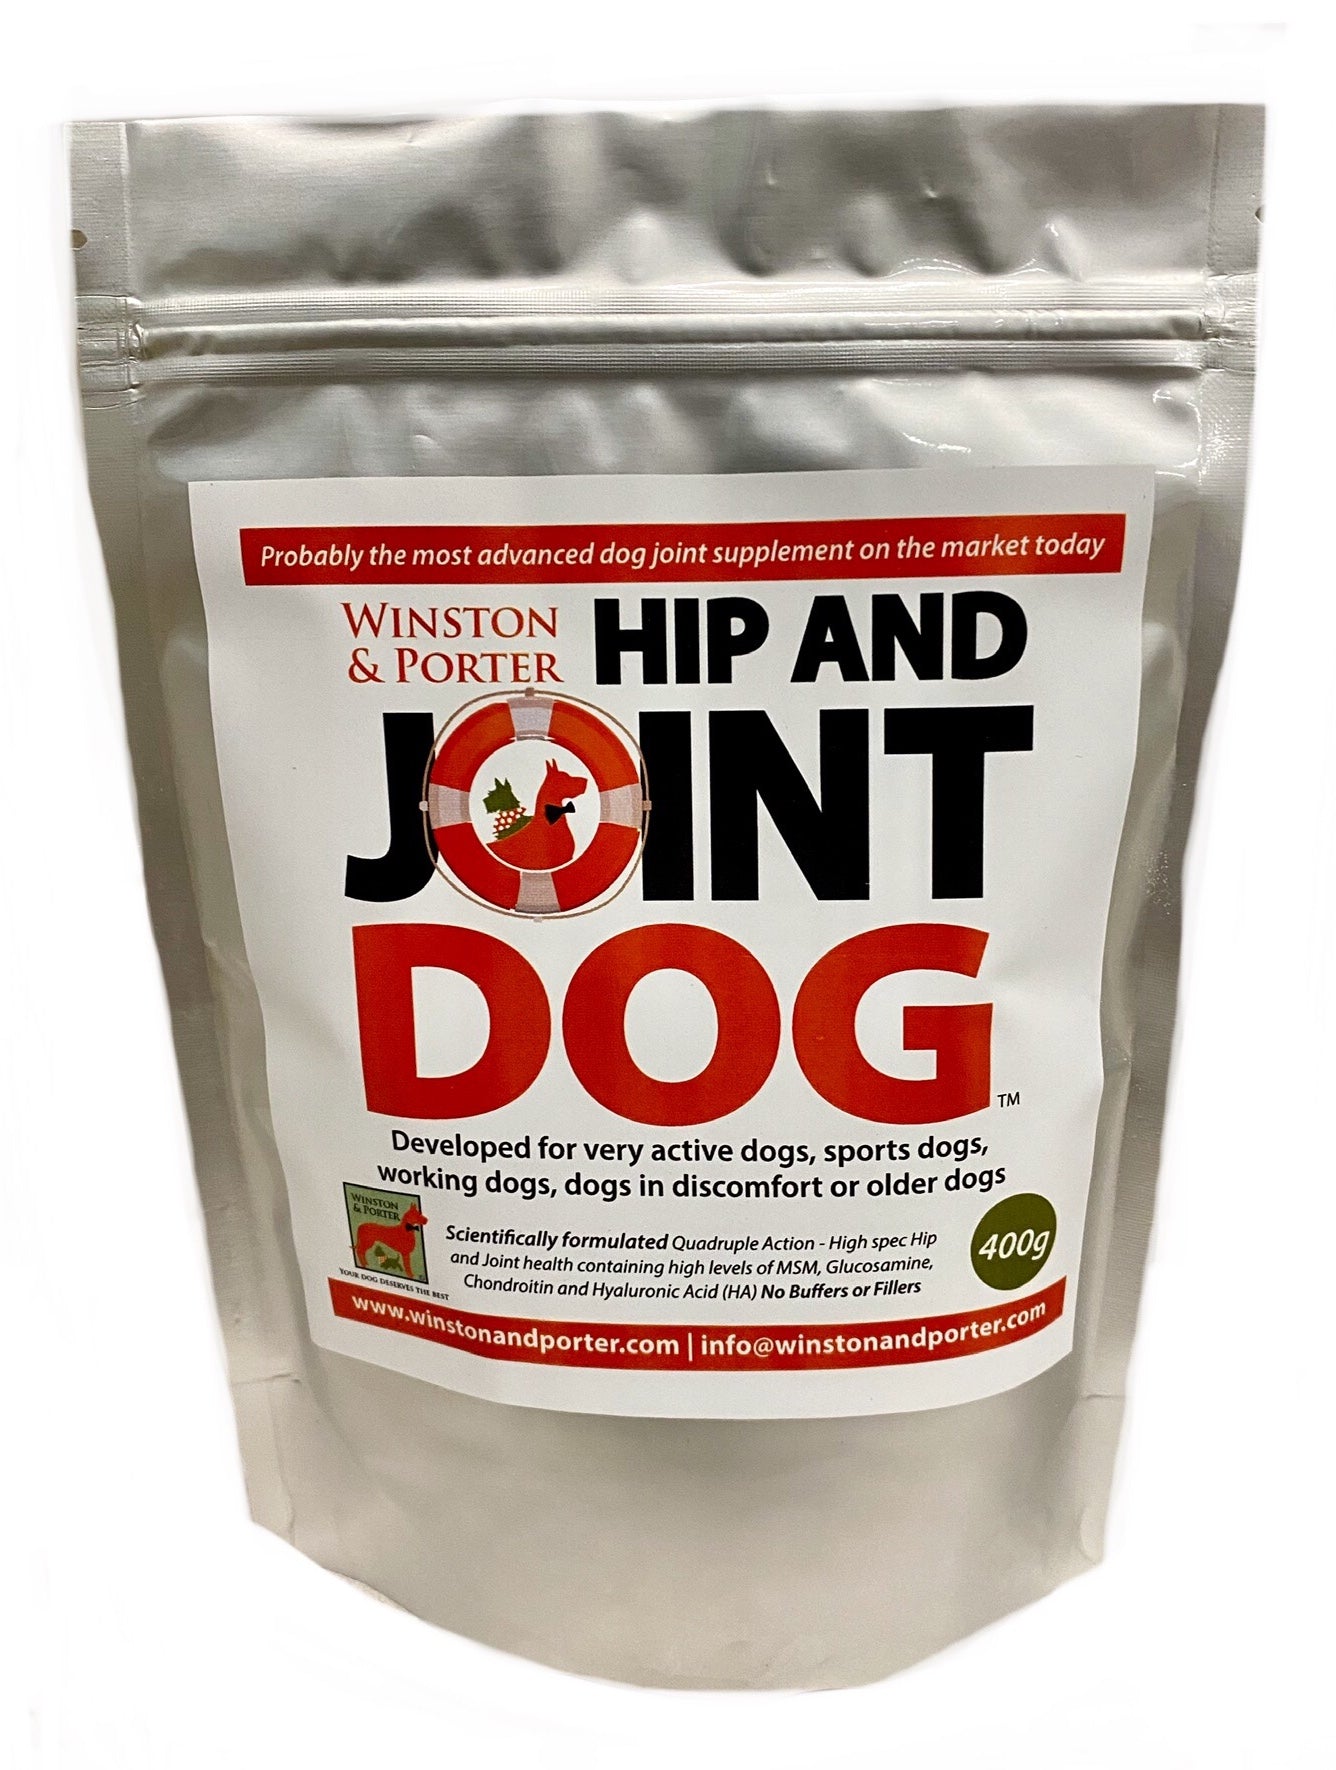 Hip and Joint Dog